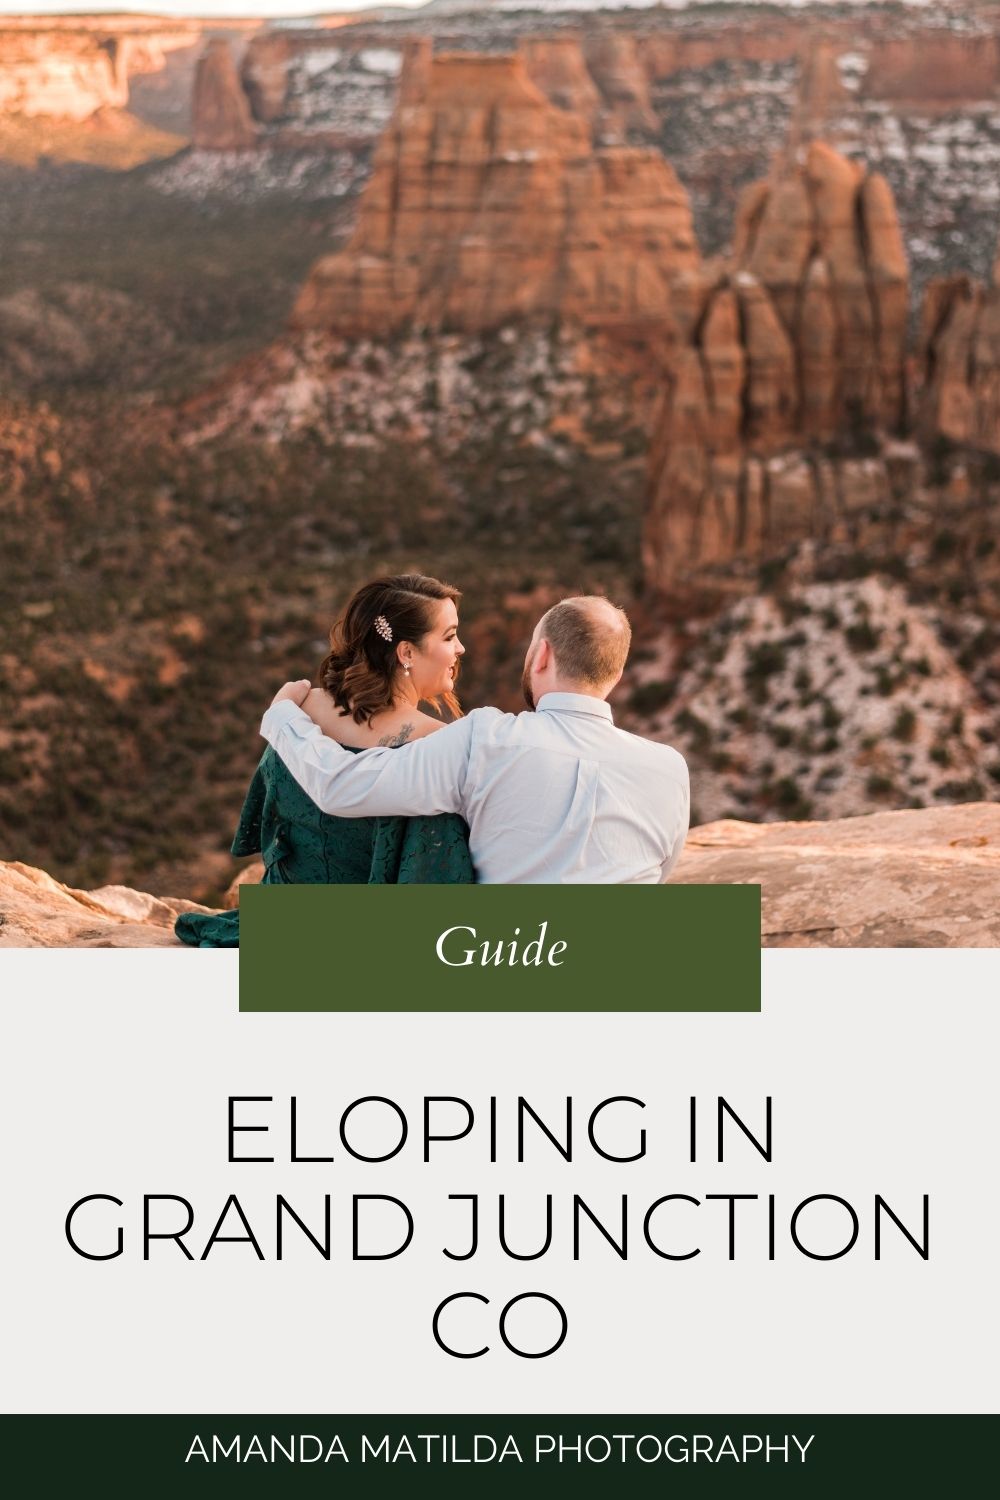 Complete Guide to Eloping in Grand Junction